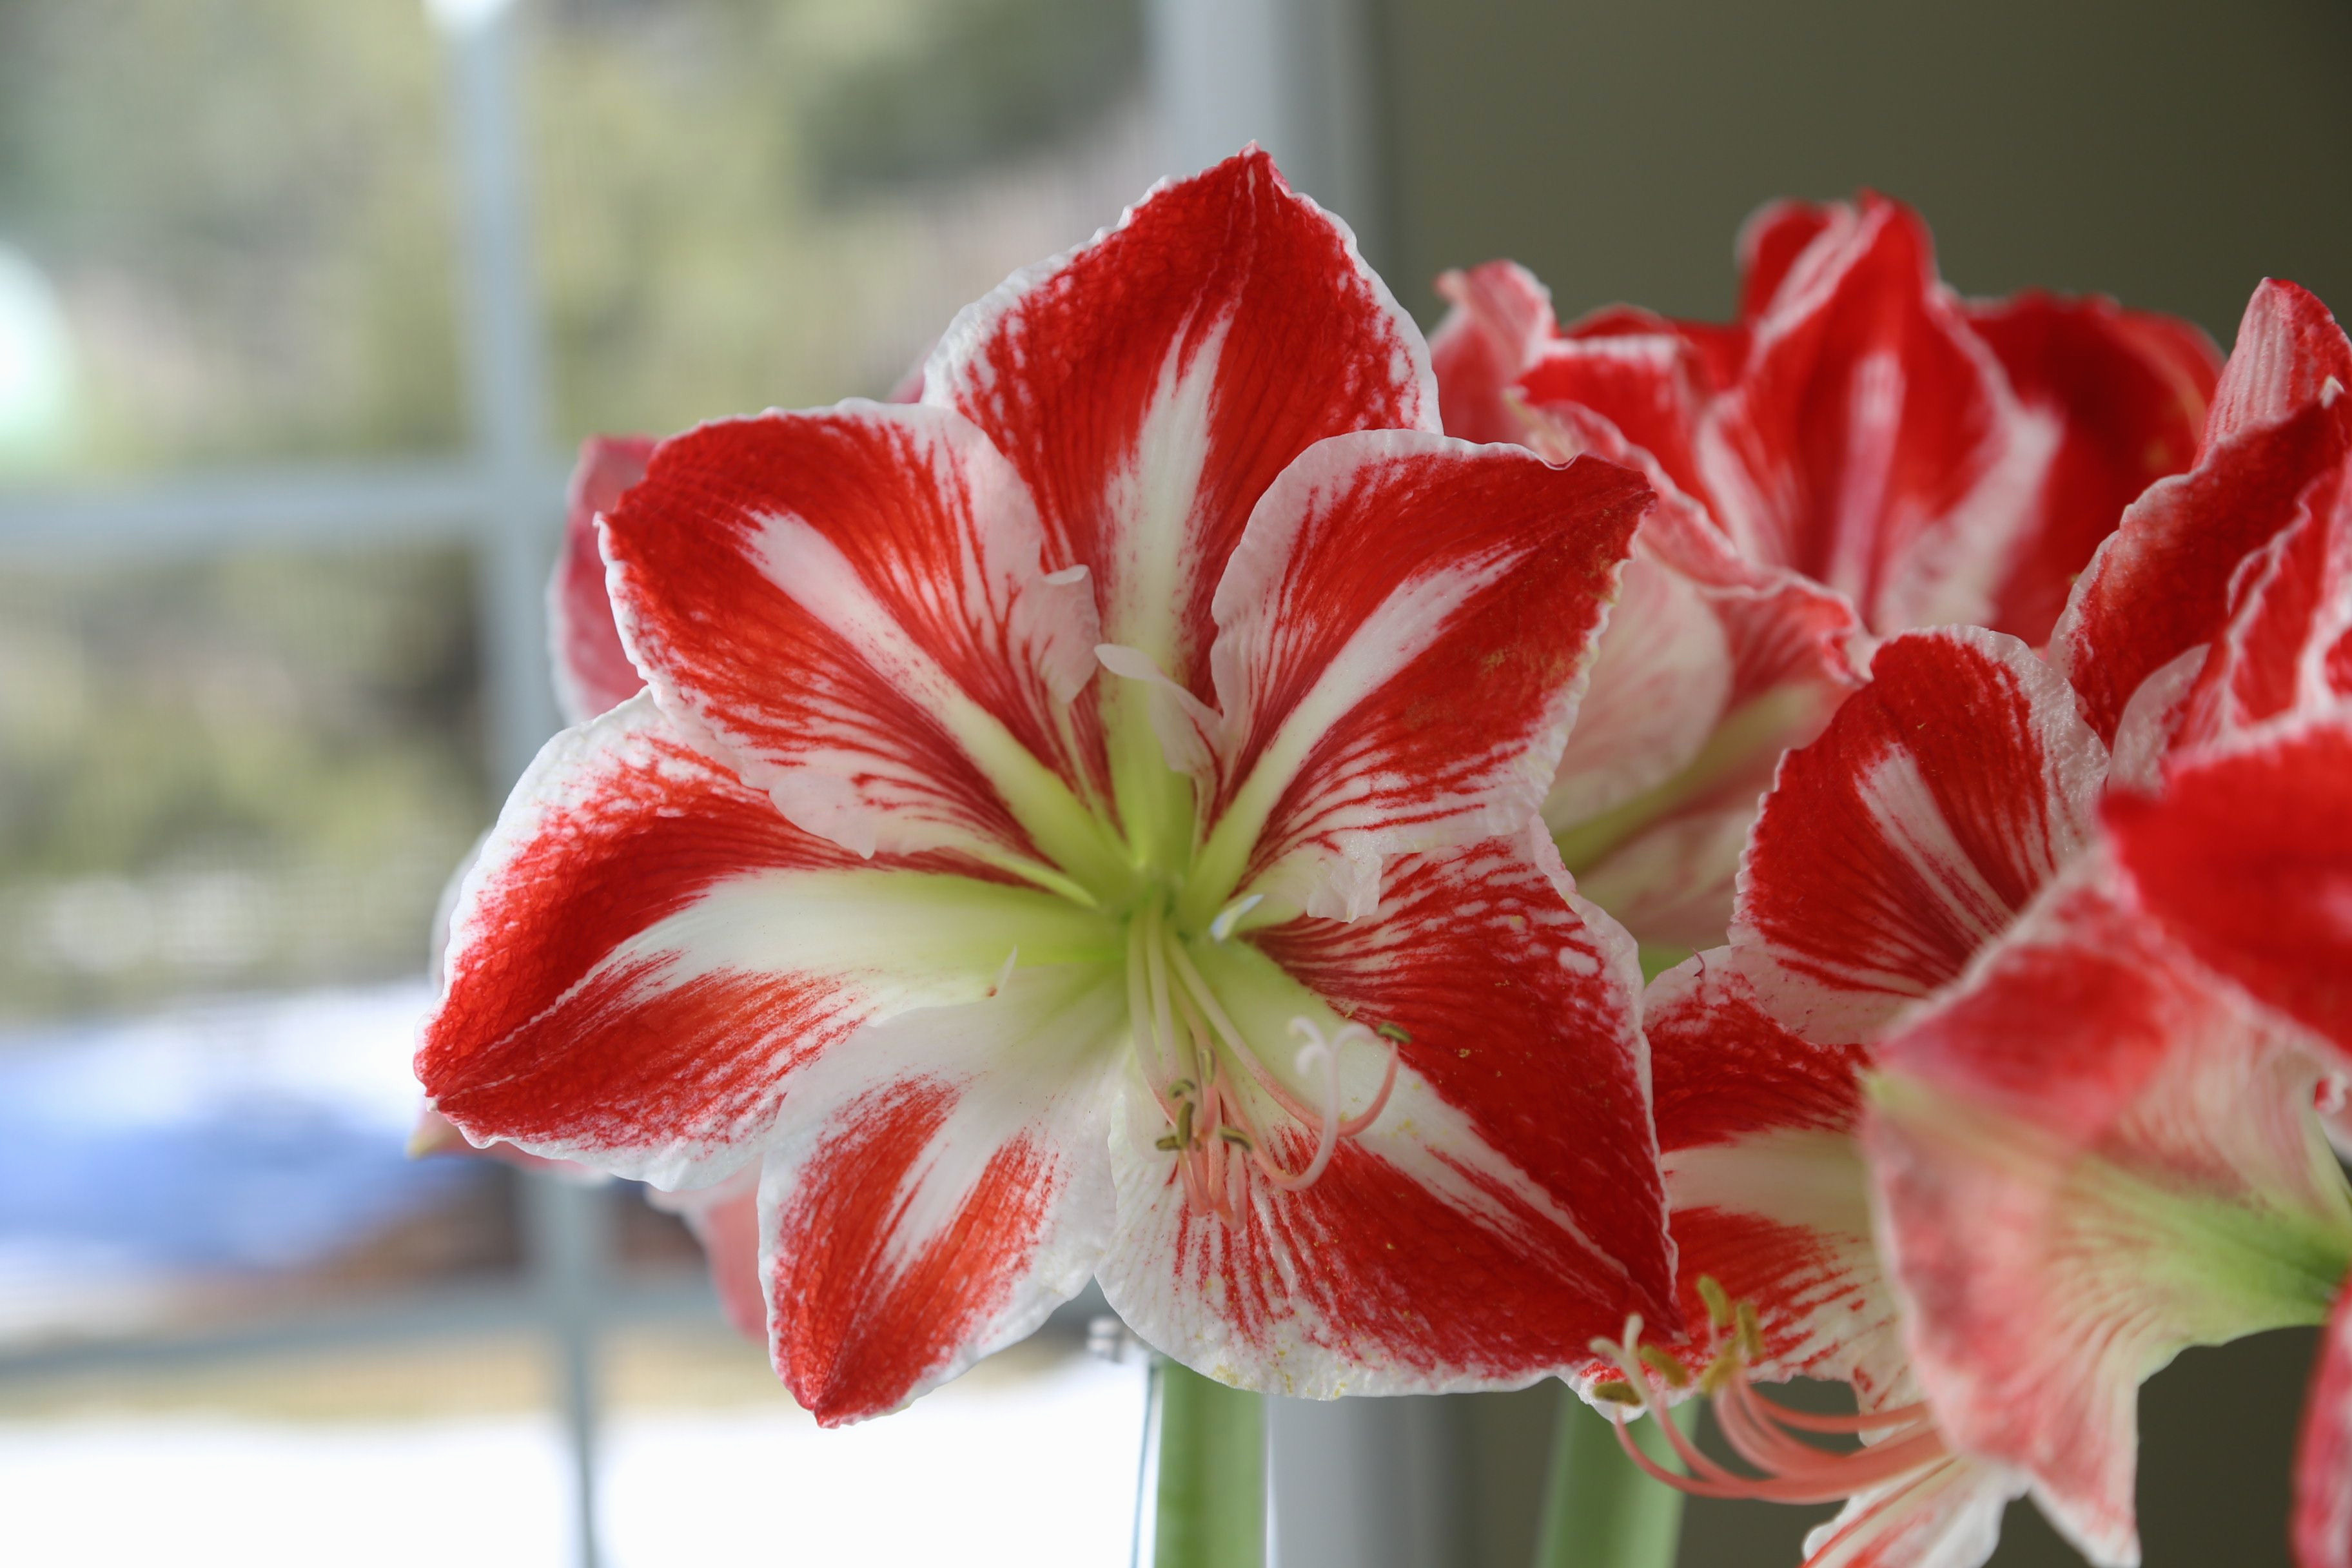 How to Grow Bulbs In Vases Of New An Amaryllis May Be the Easiest and Most Impressive Plant You Ll within An Amaryllis May Be the Easiest and Most Impressive Plant You Ll